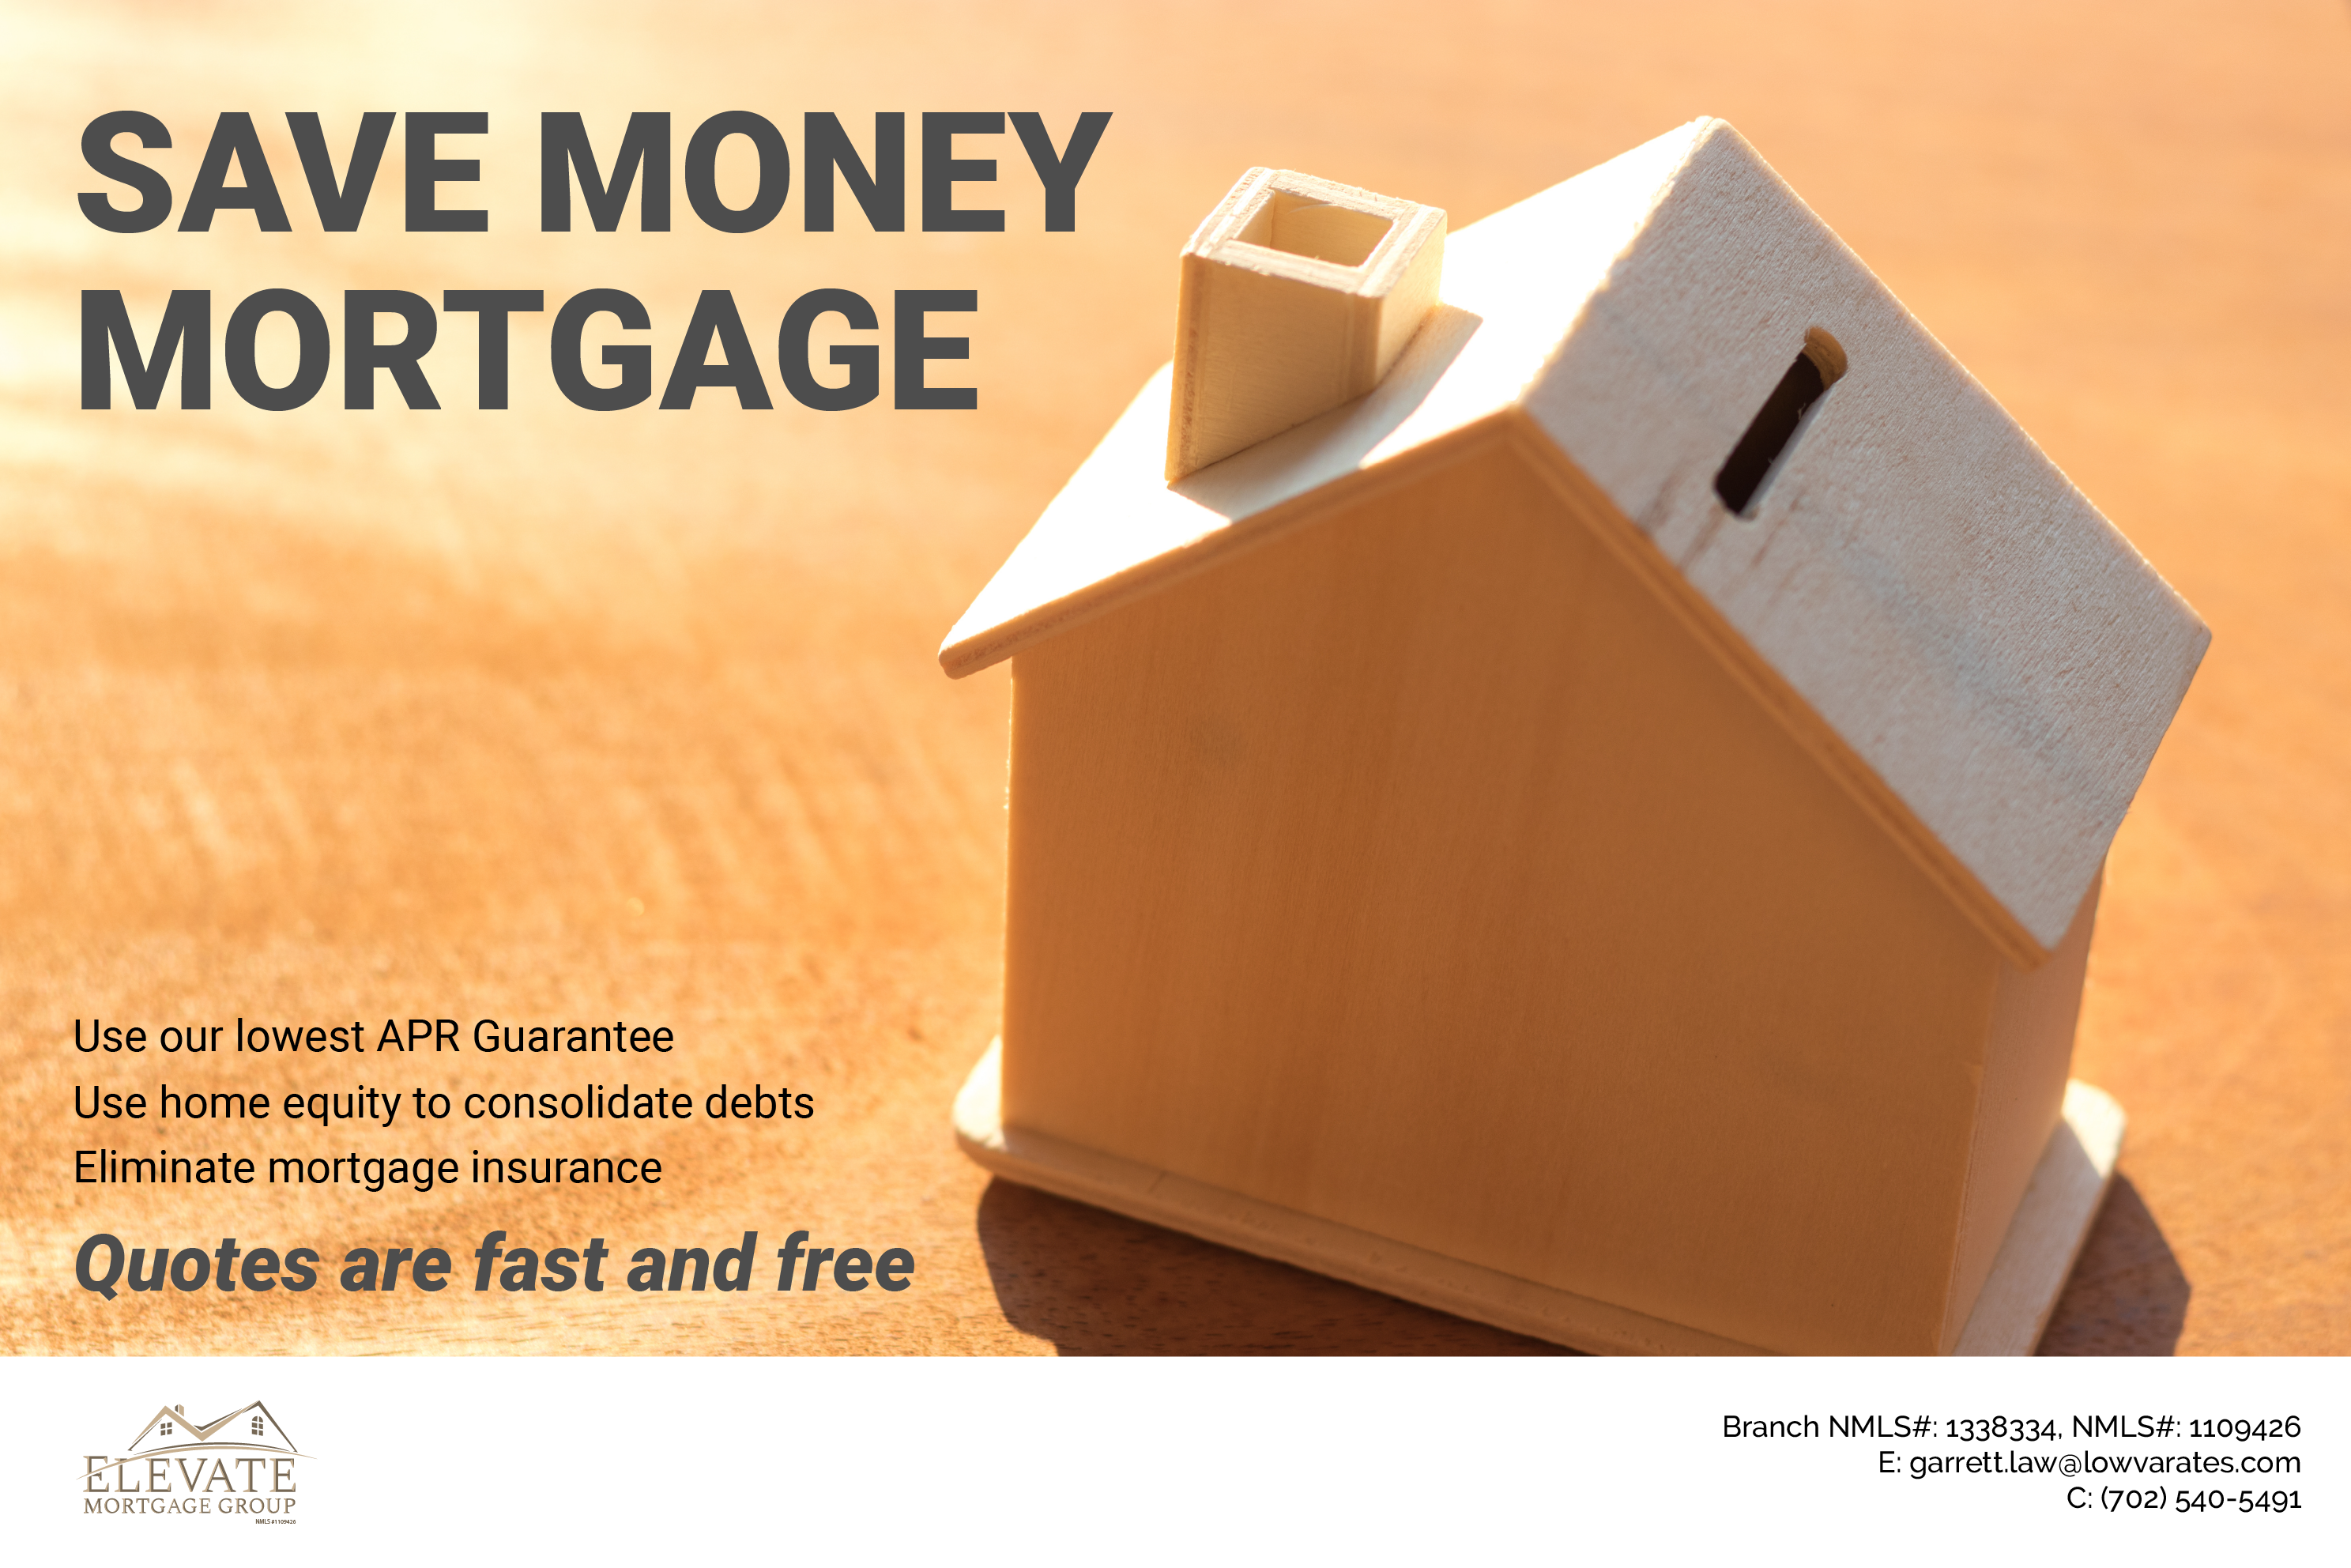 save_money_mortgage_marketing-01.png (5.80 MB)